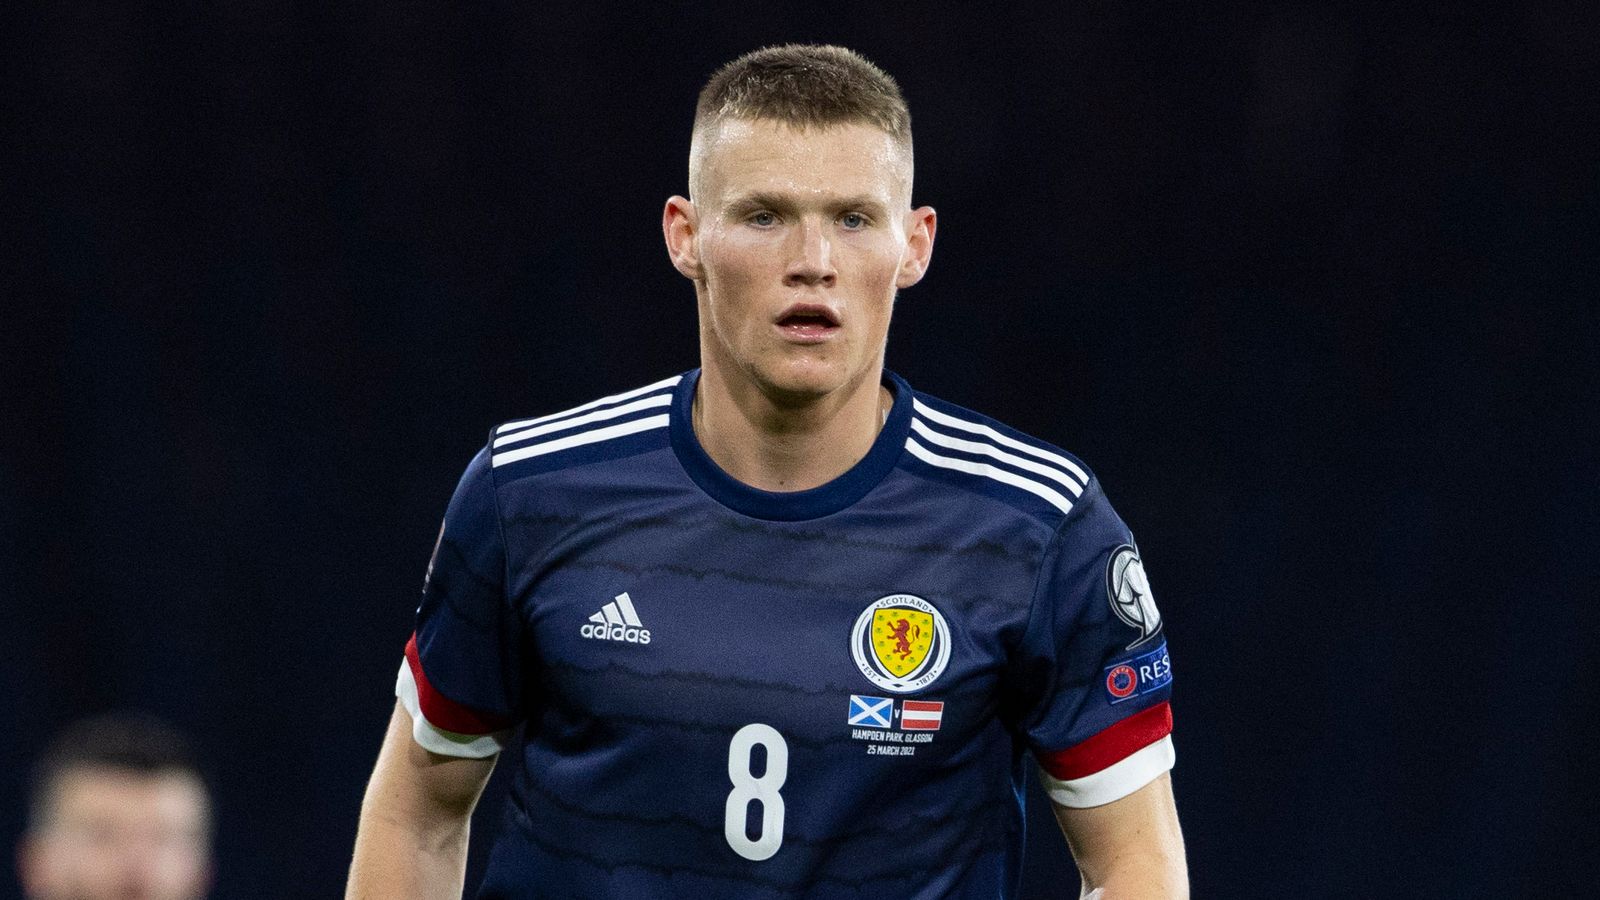  Scott McTominay, wearing a Scotland jersey with the number 8, looking focused during a soccer match.